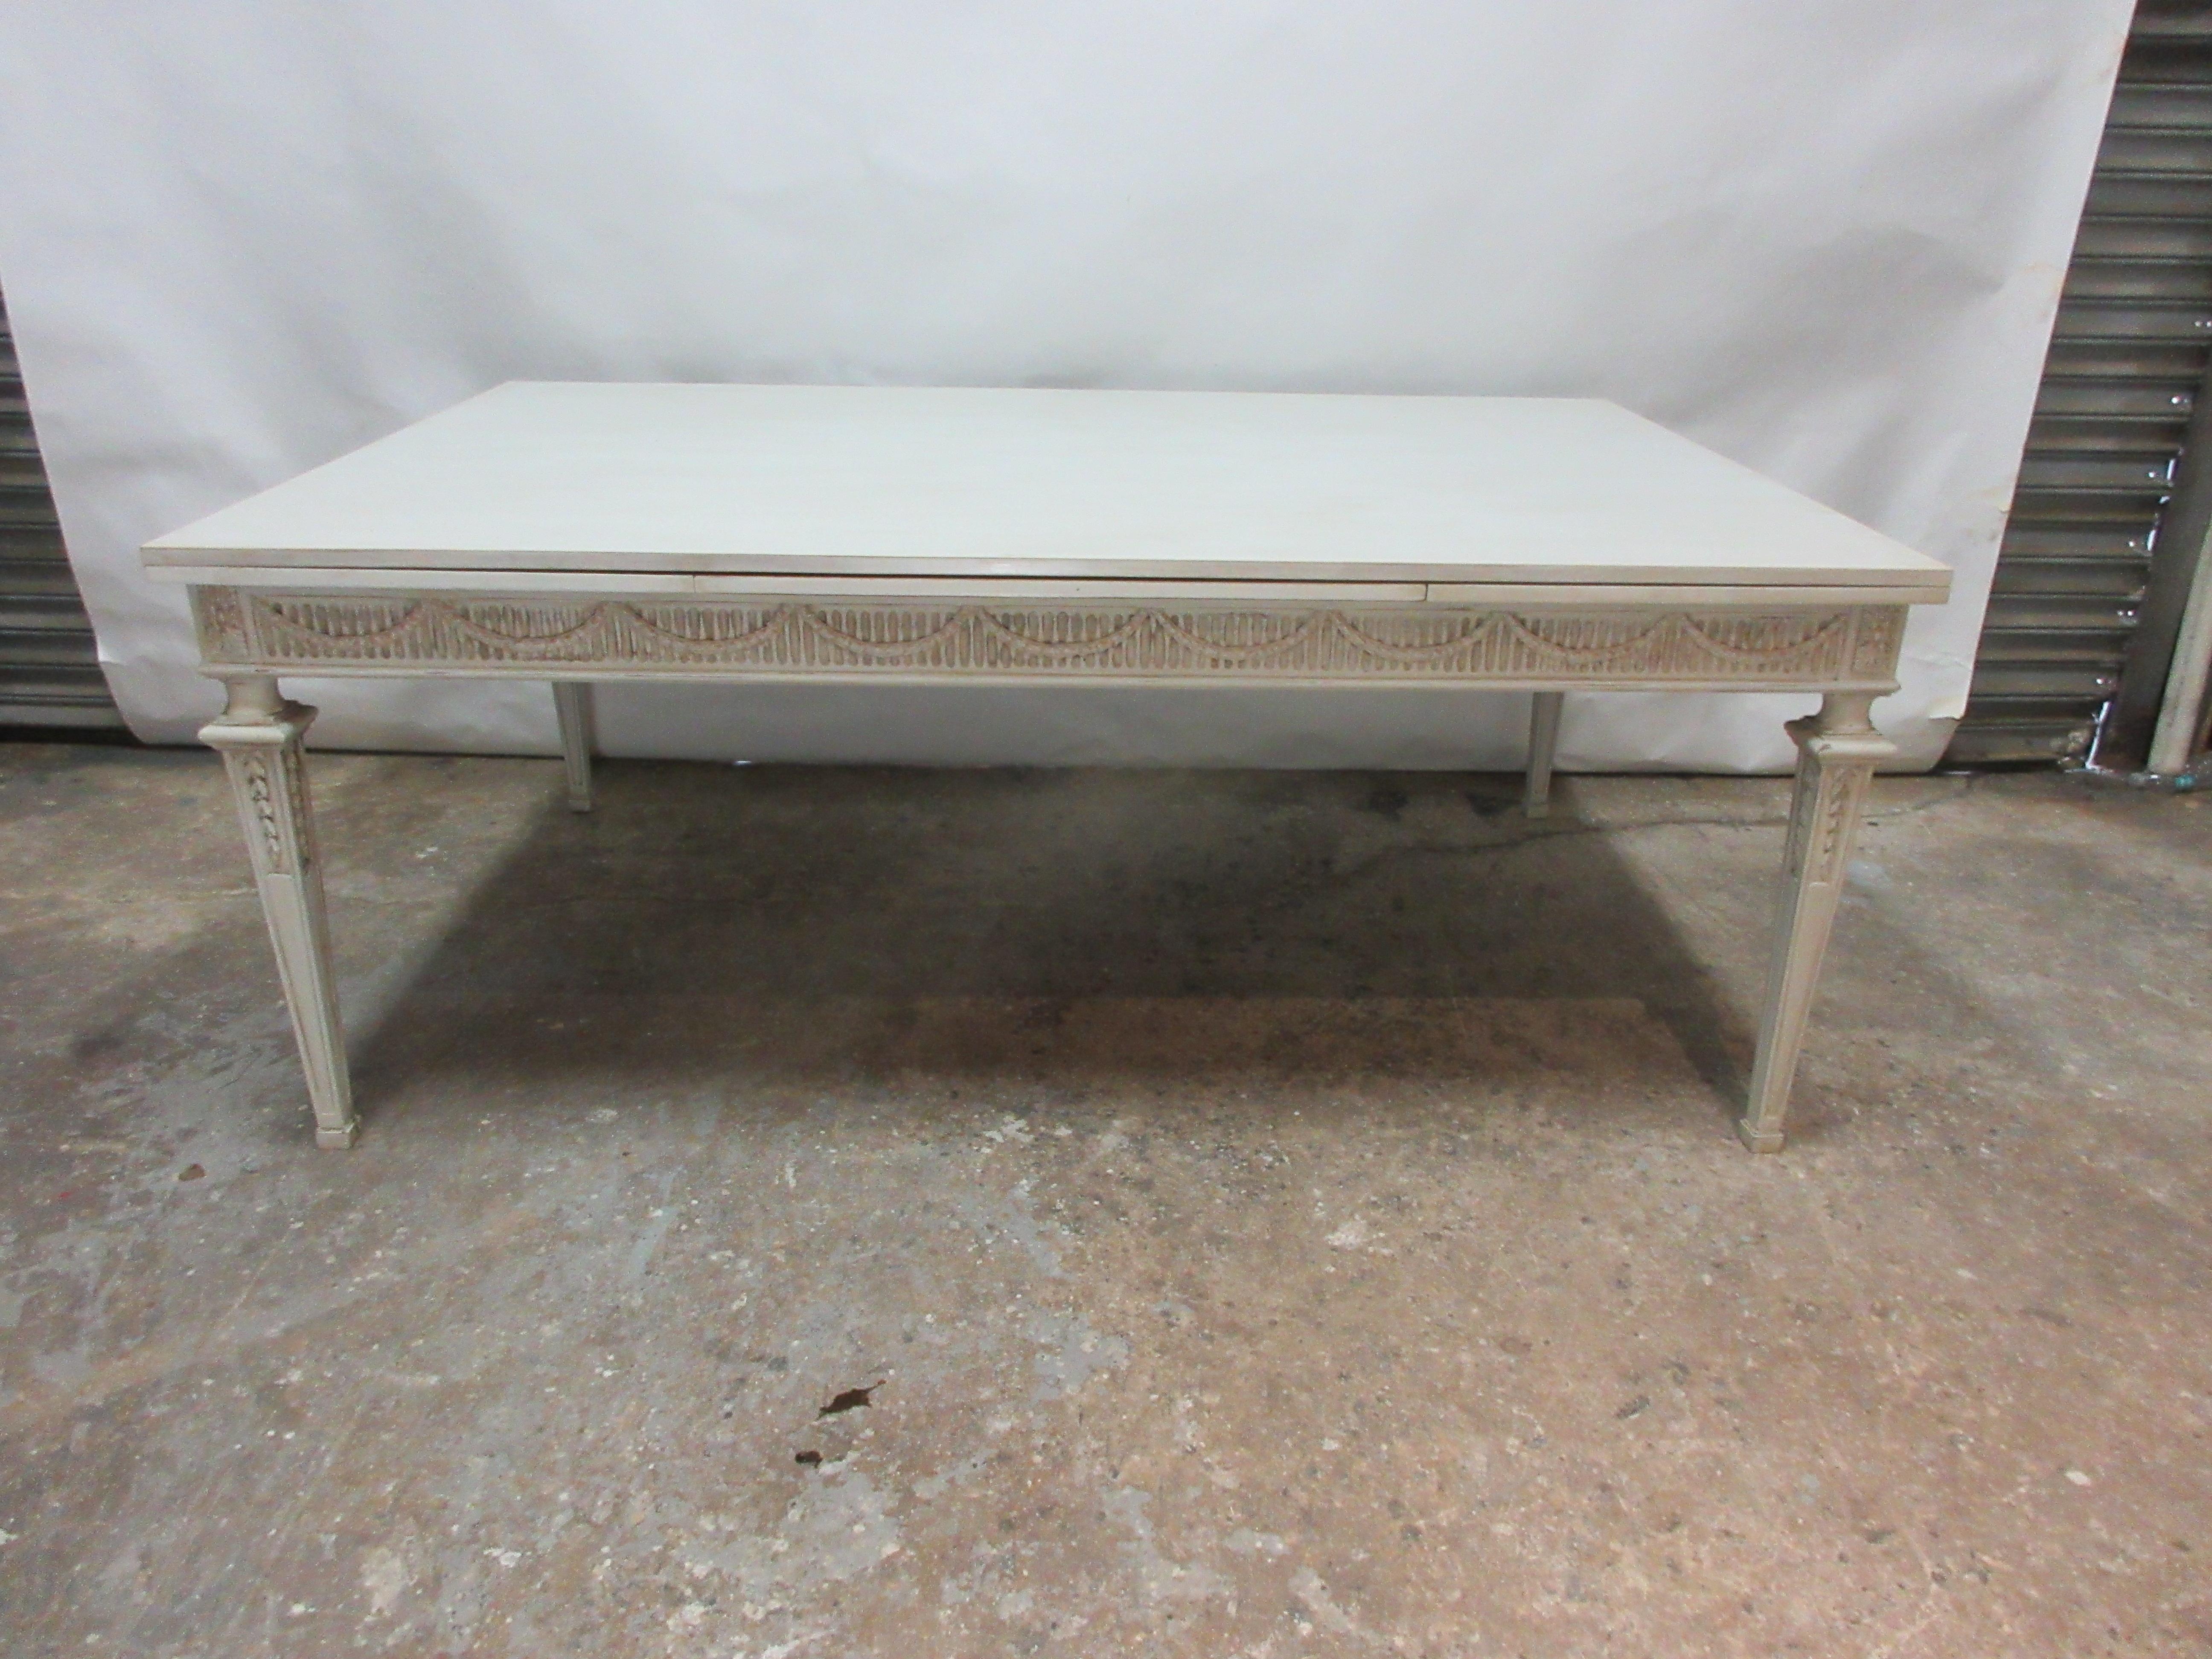 This is a Swedish Gustavian dining table, its been restored and repainted with milk paints oyster white. It has 2 built in leaves that pull out at each end.
Leaf 22 inches, full length open 118 inches.